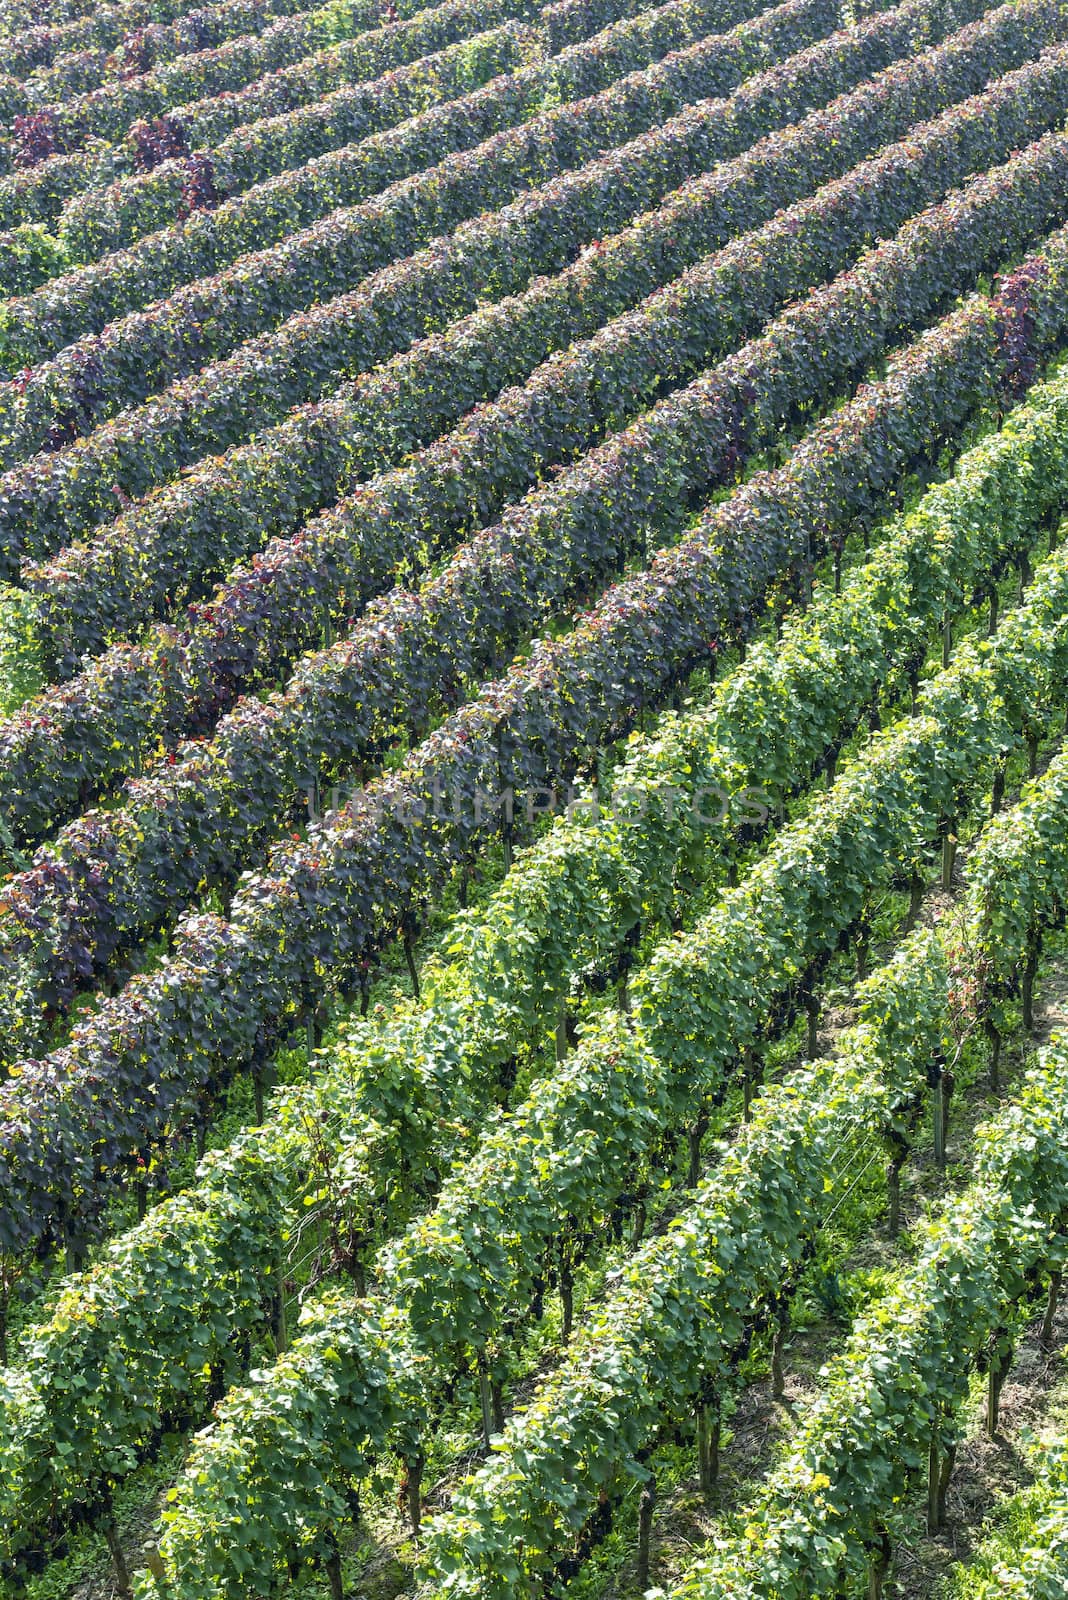 Beautiful rows of grapes in the vineyard by Rainman